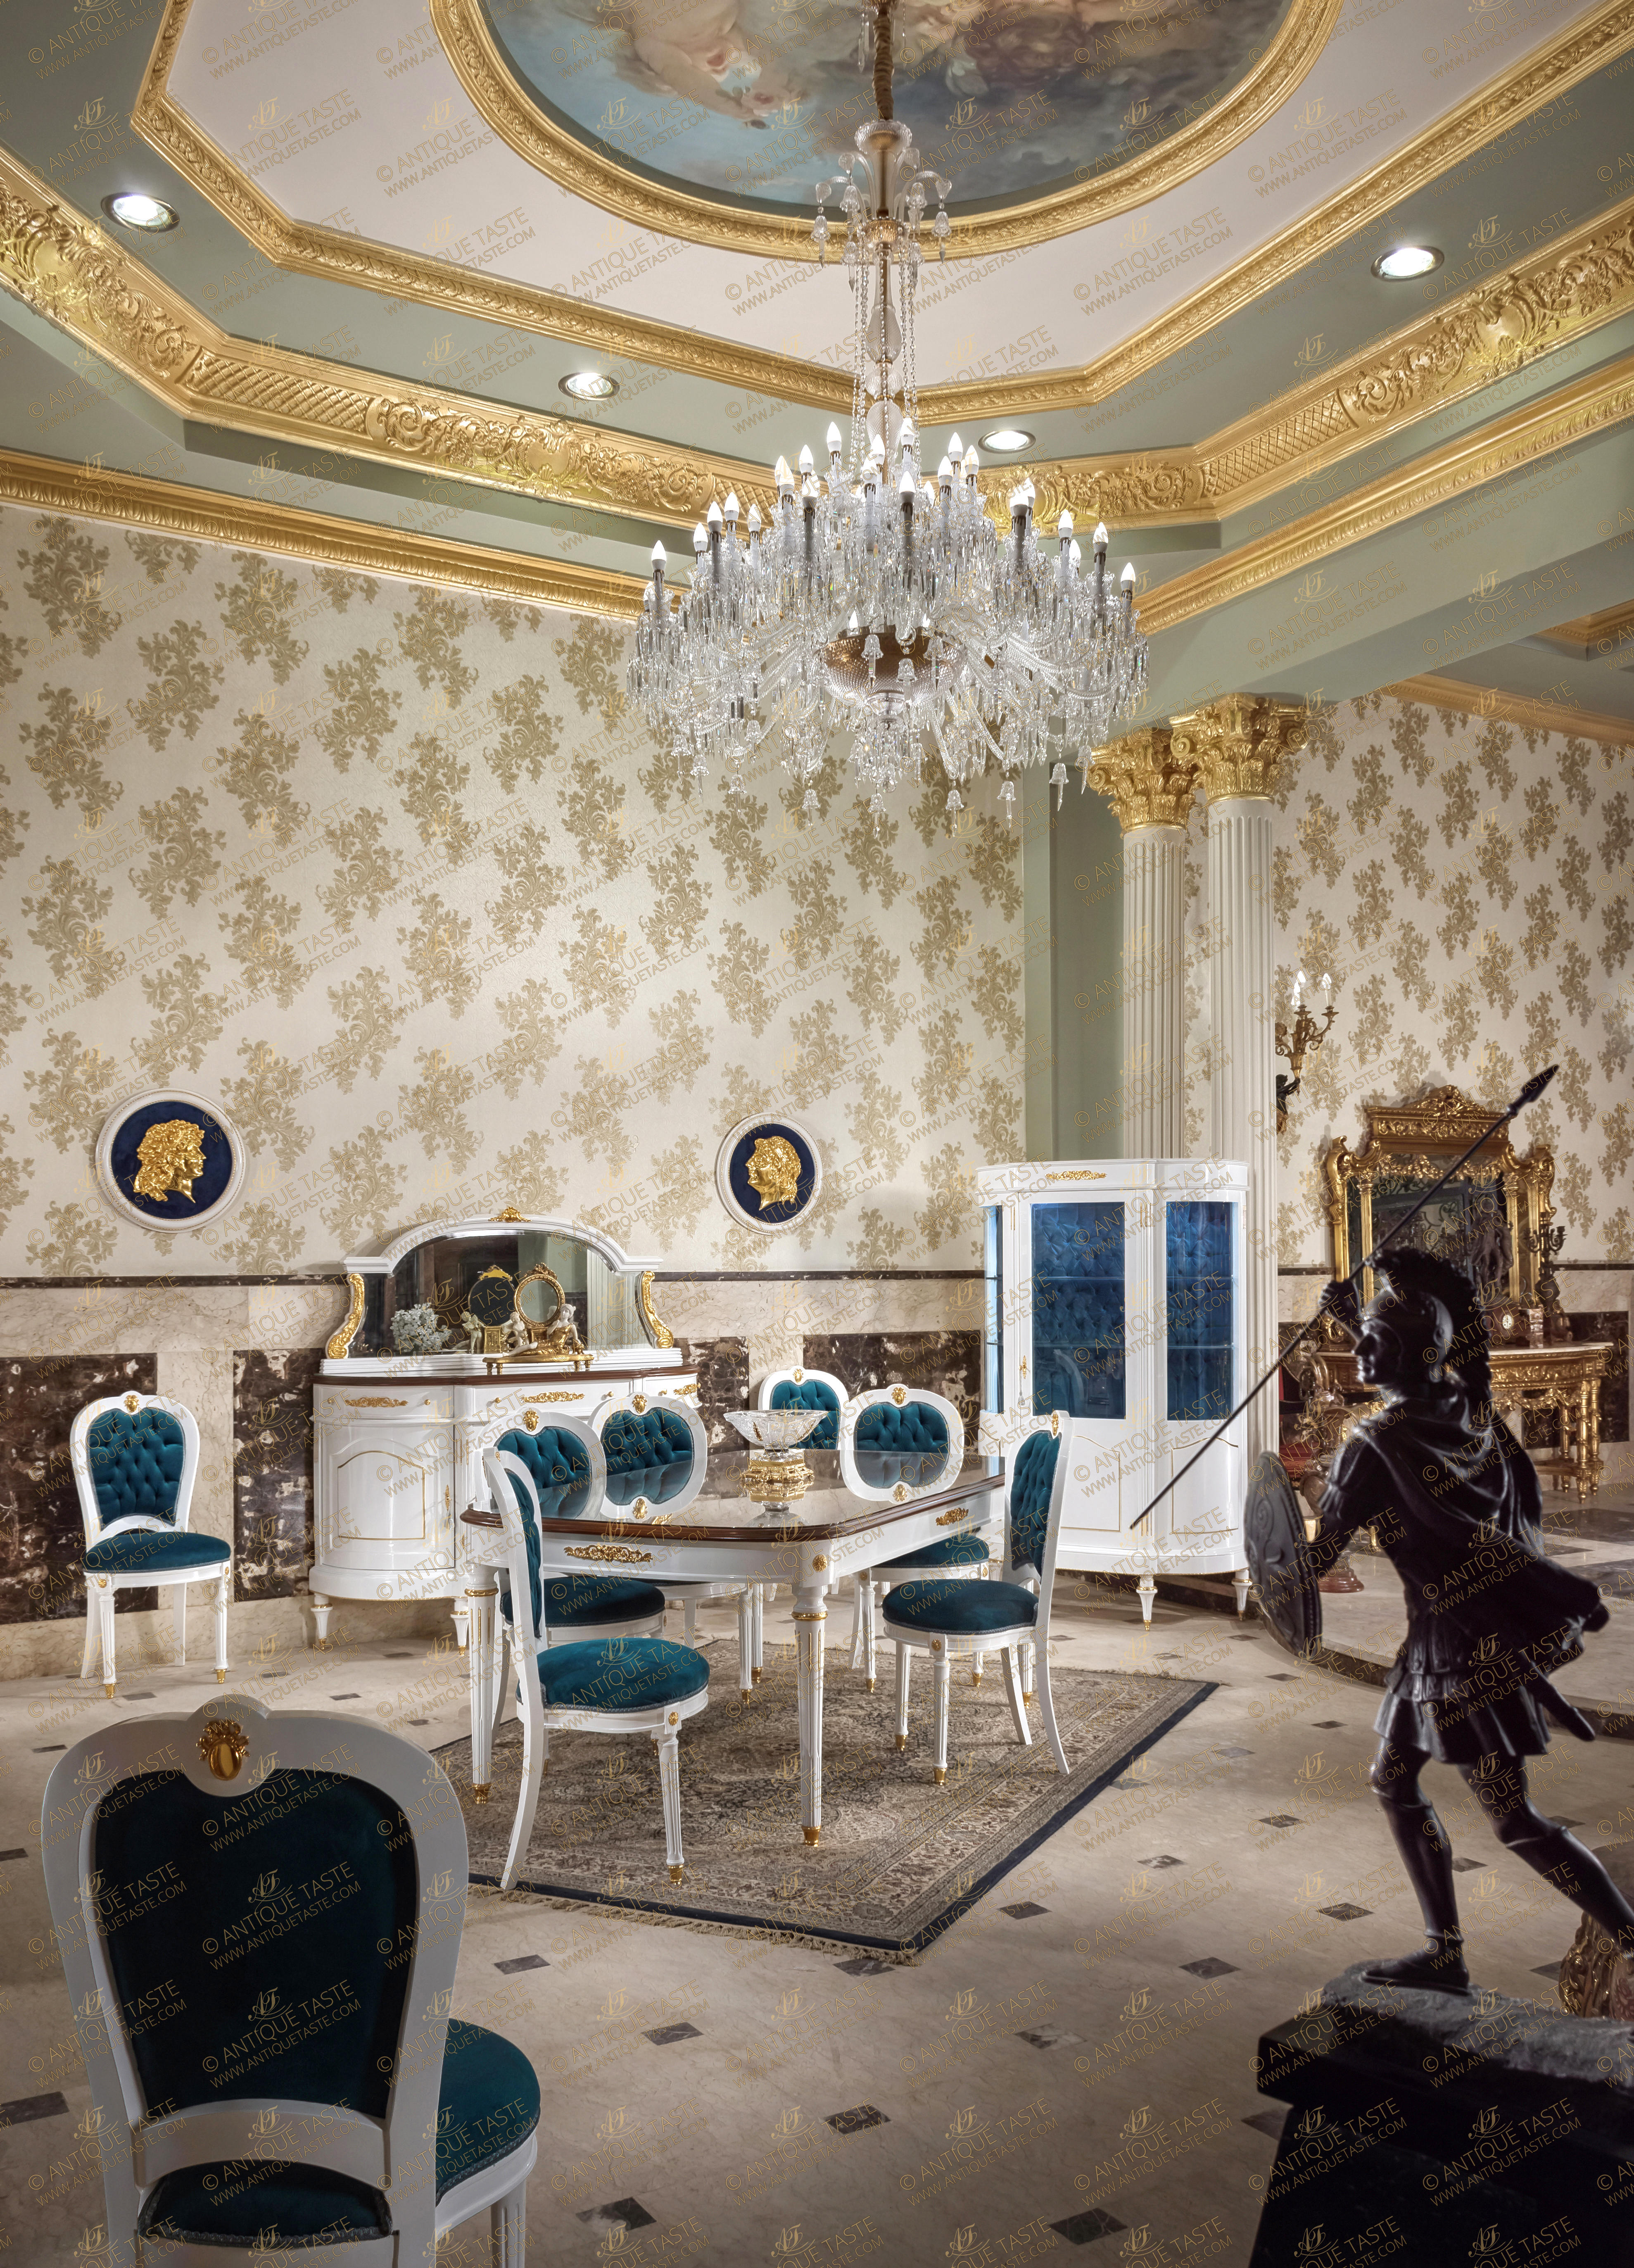 Louis XVI style Dining Set after the model by Guillaume Benneman